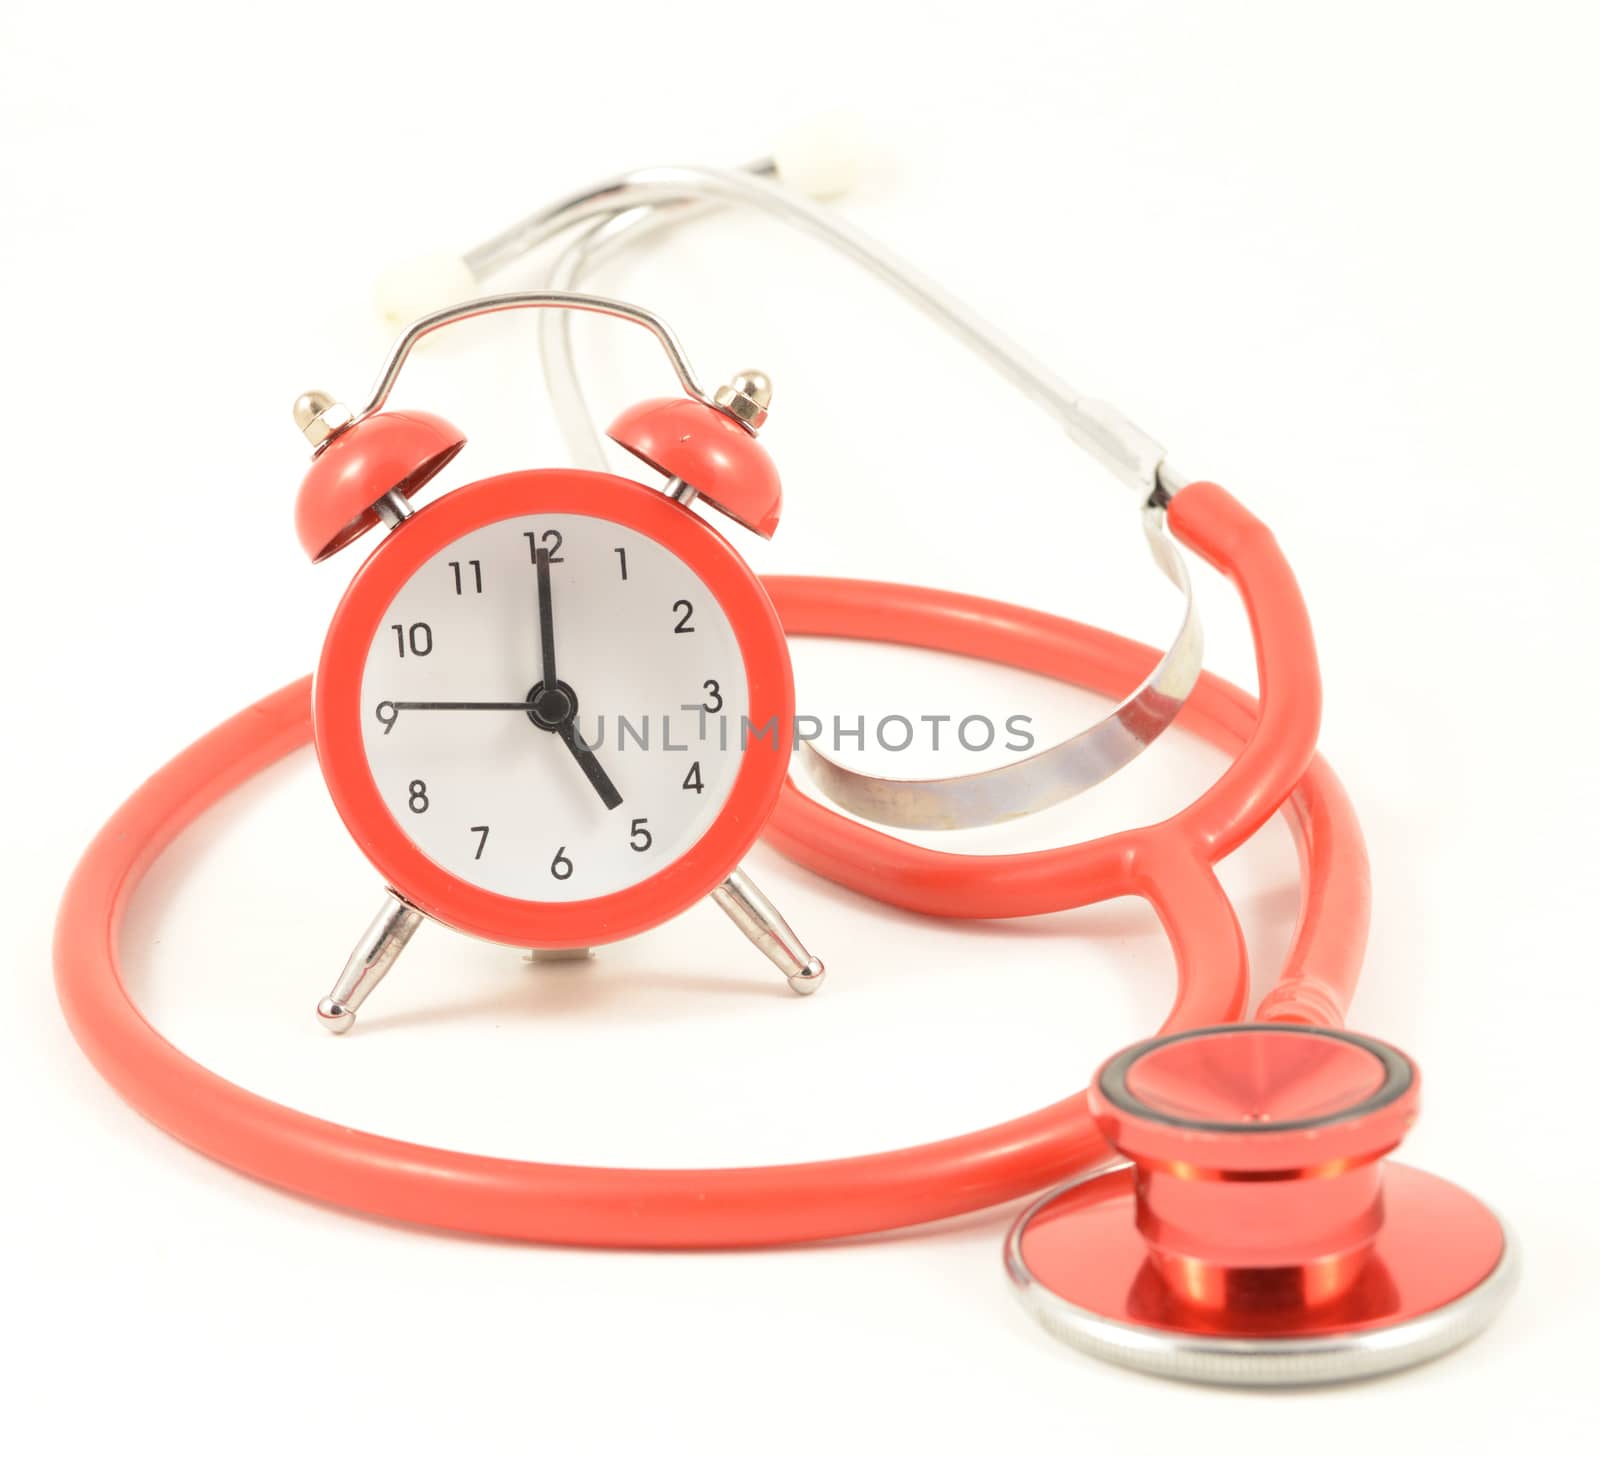 A concept focusing on time and medical issues with a stethoscope and red alarm clock.